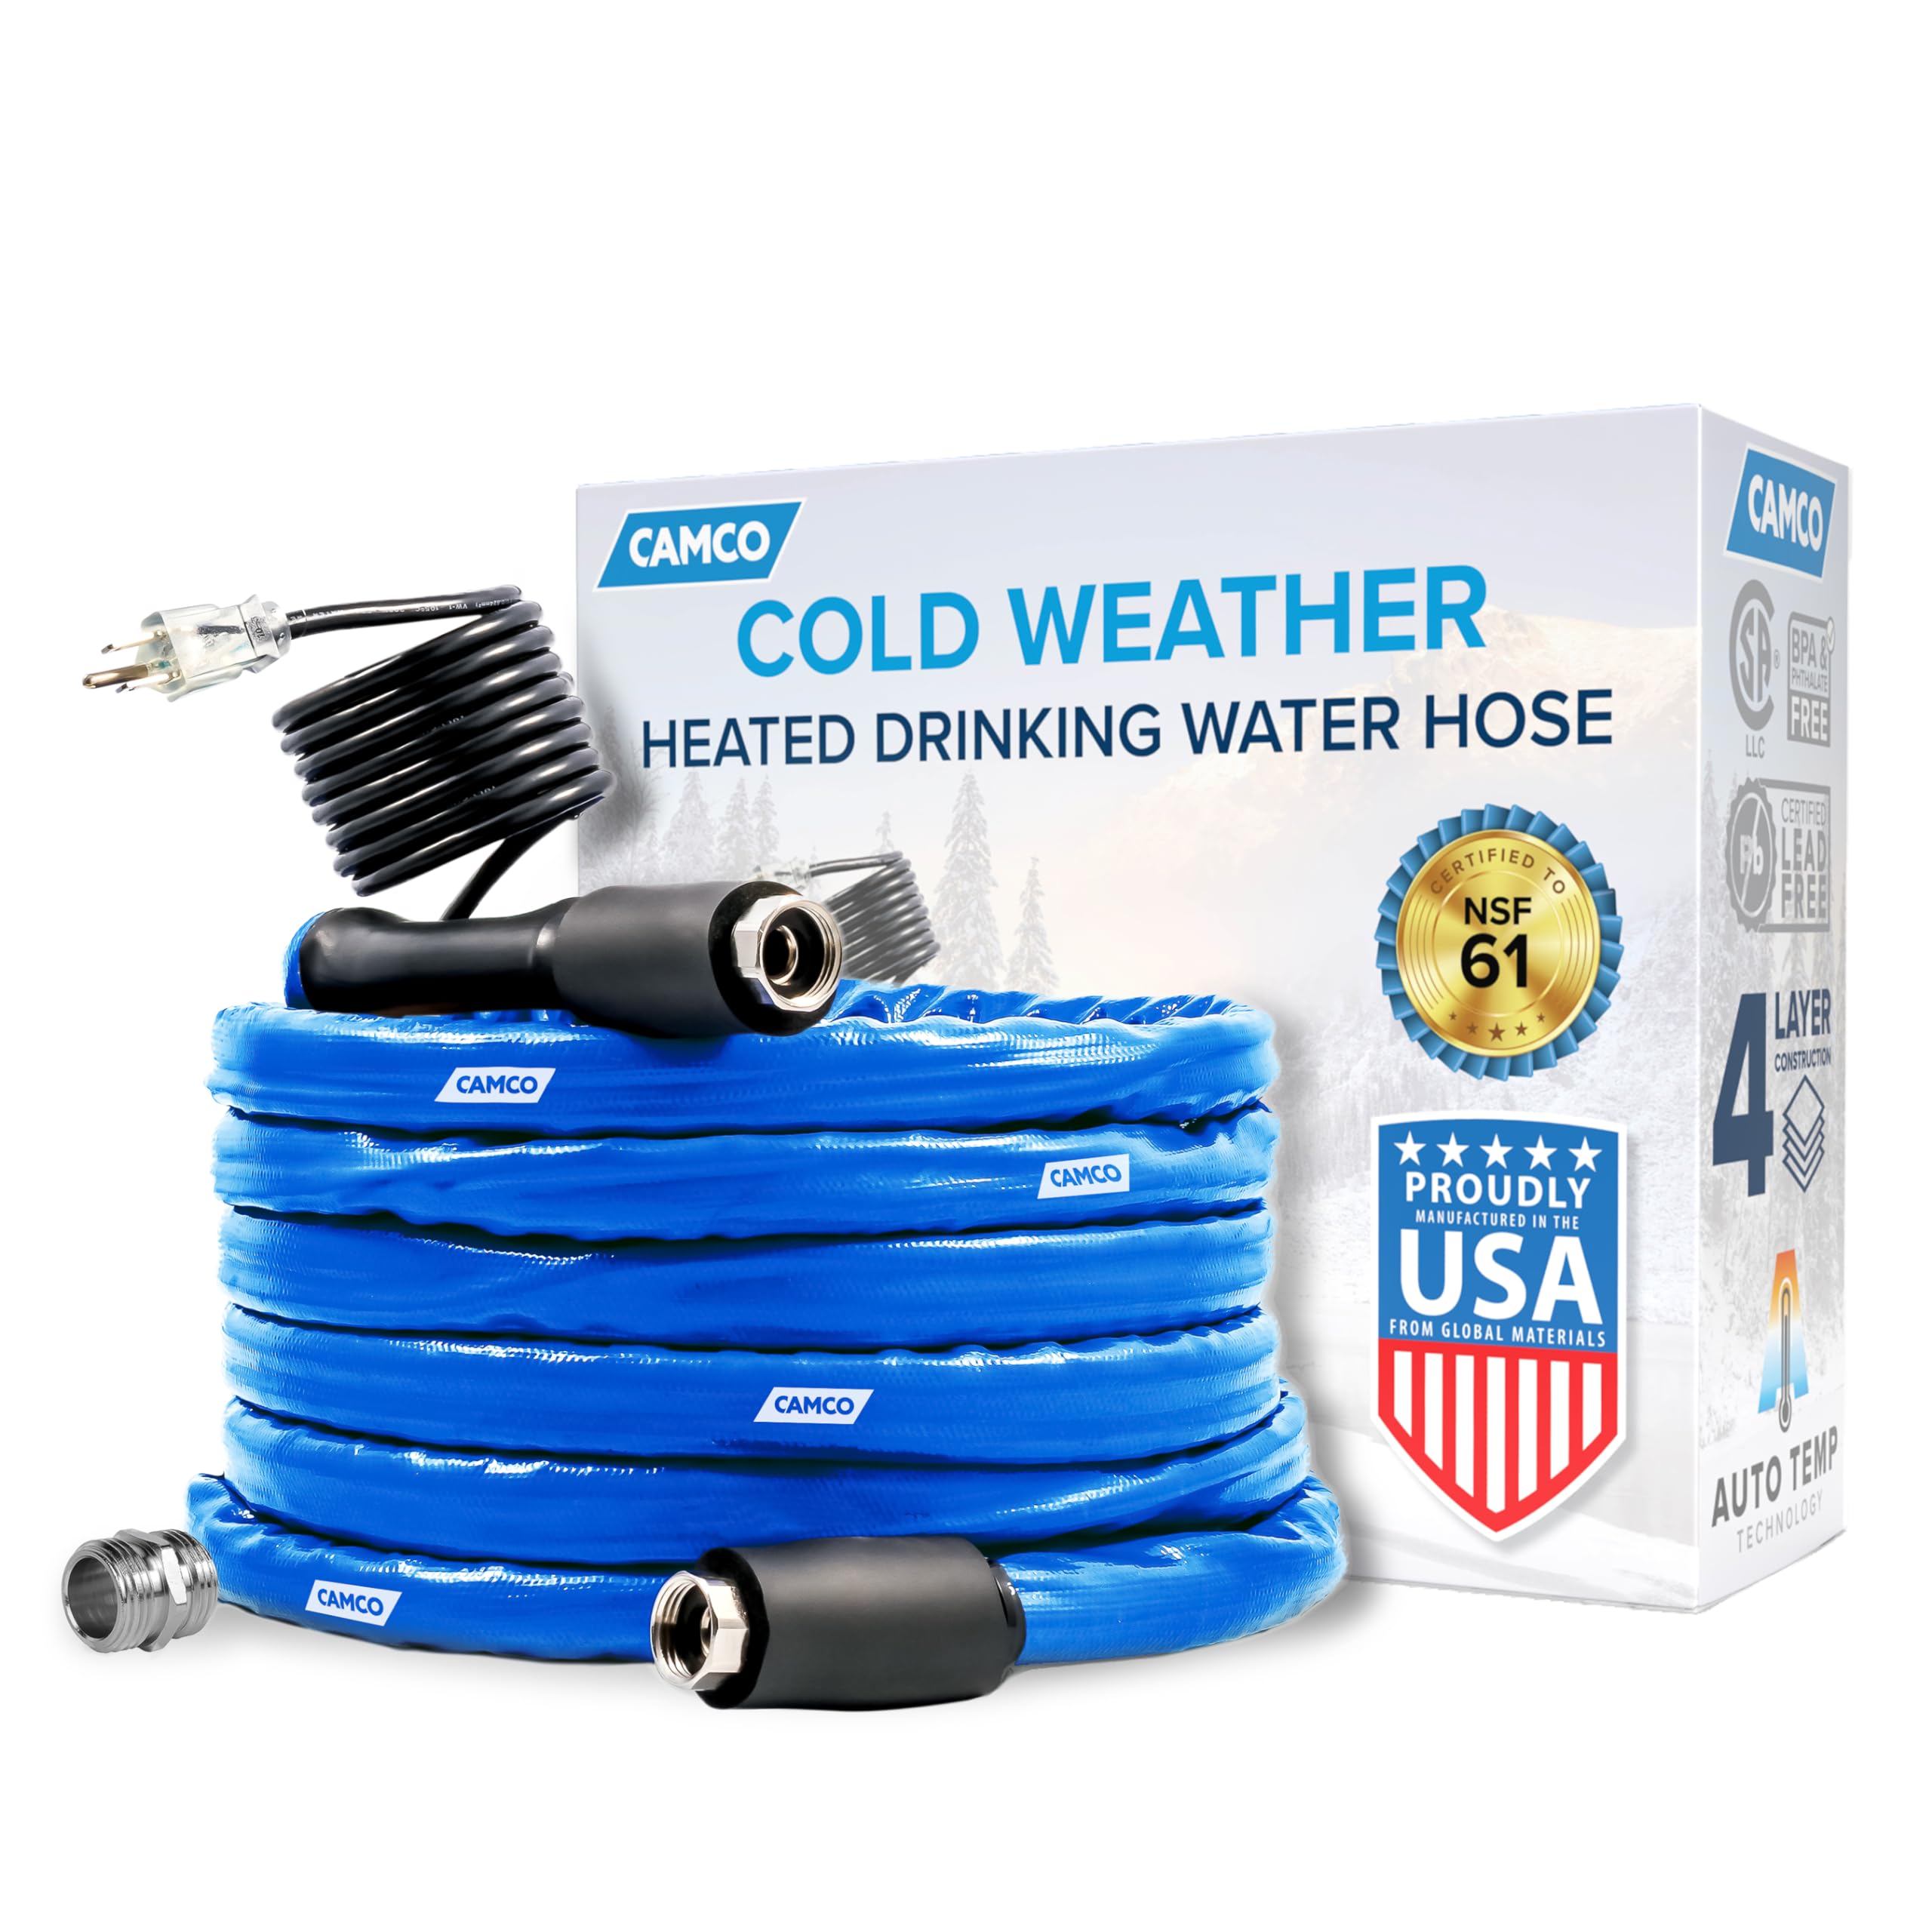 Camco 50-Foot Heated Drinking Water Hose | Features Wat...